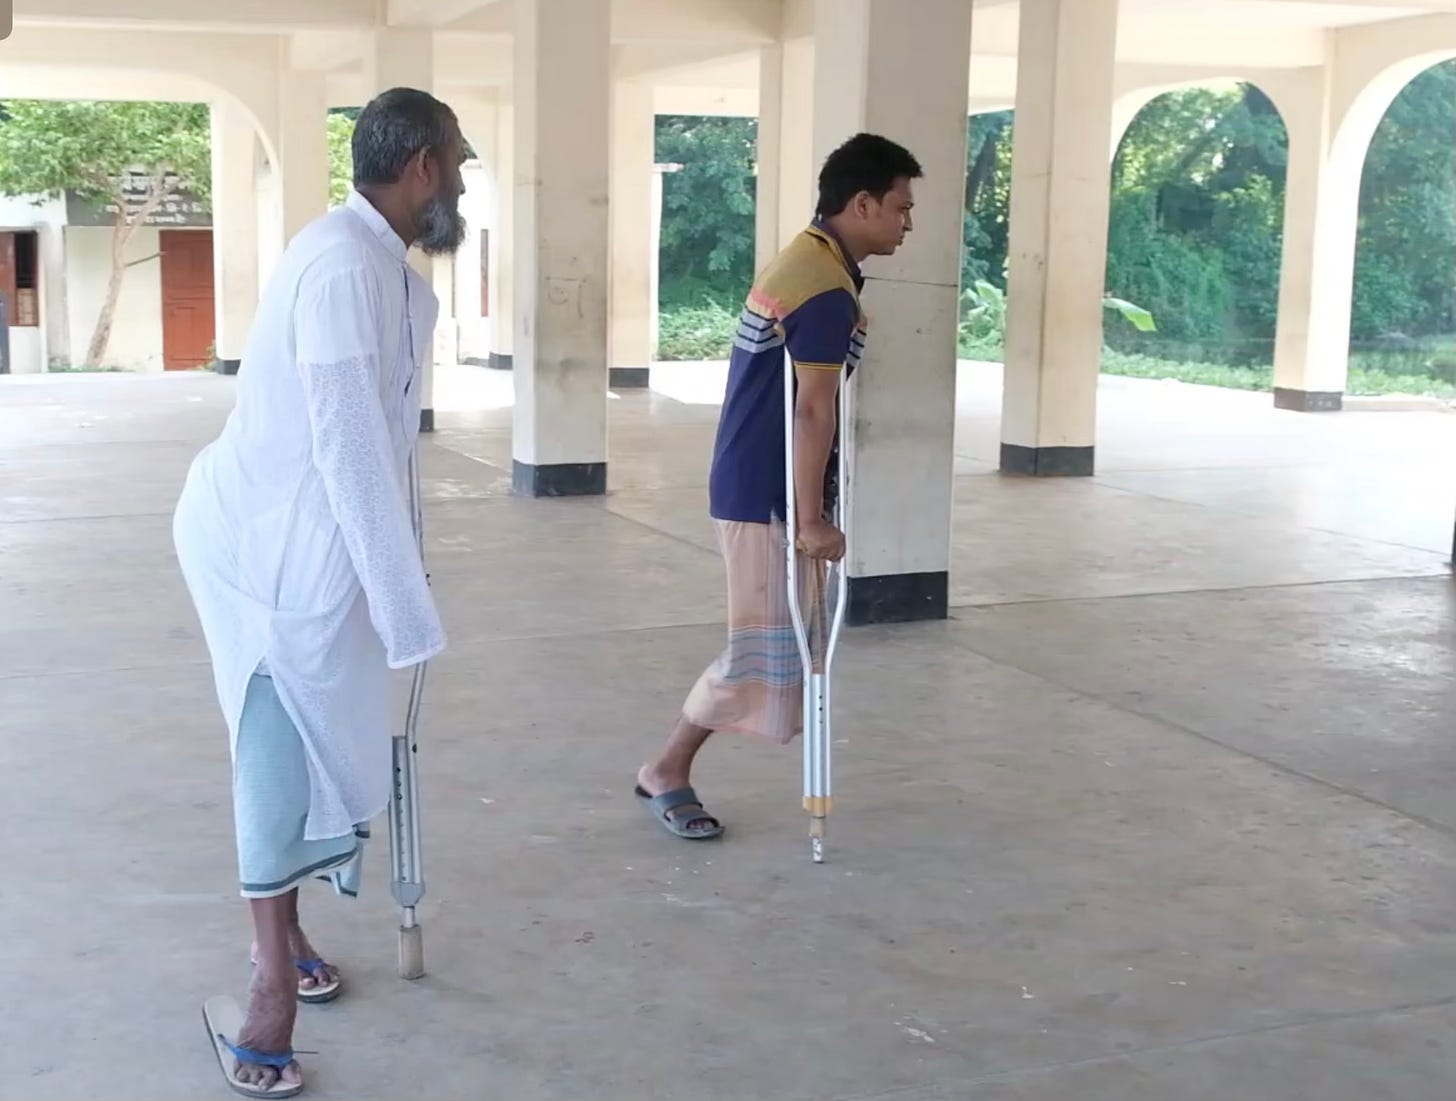 Two men stand in an open air pavilion. One balances himself with a crutch, another man with one leg studies himself with a crutch.